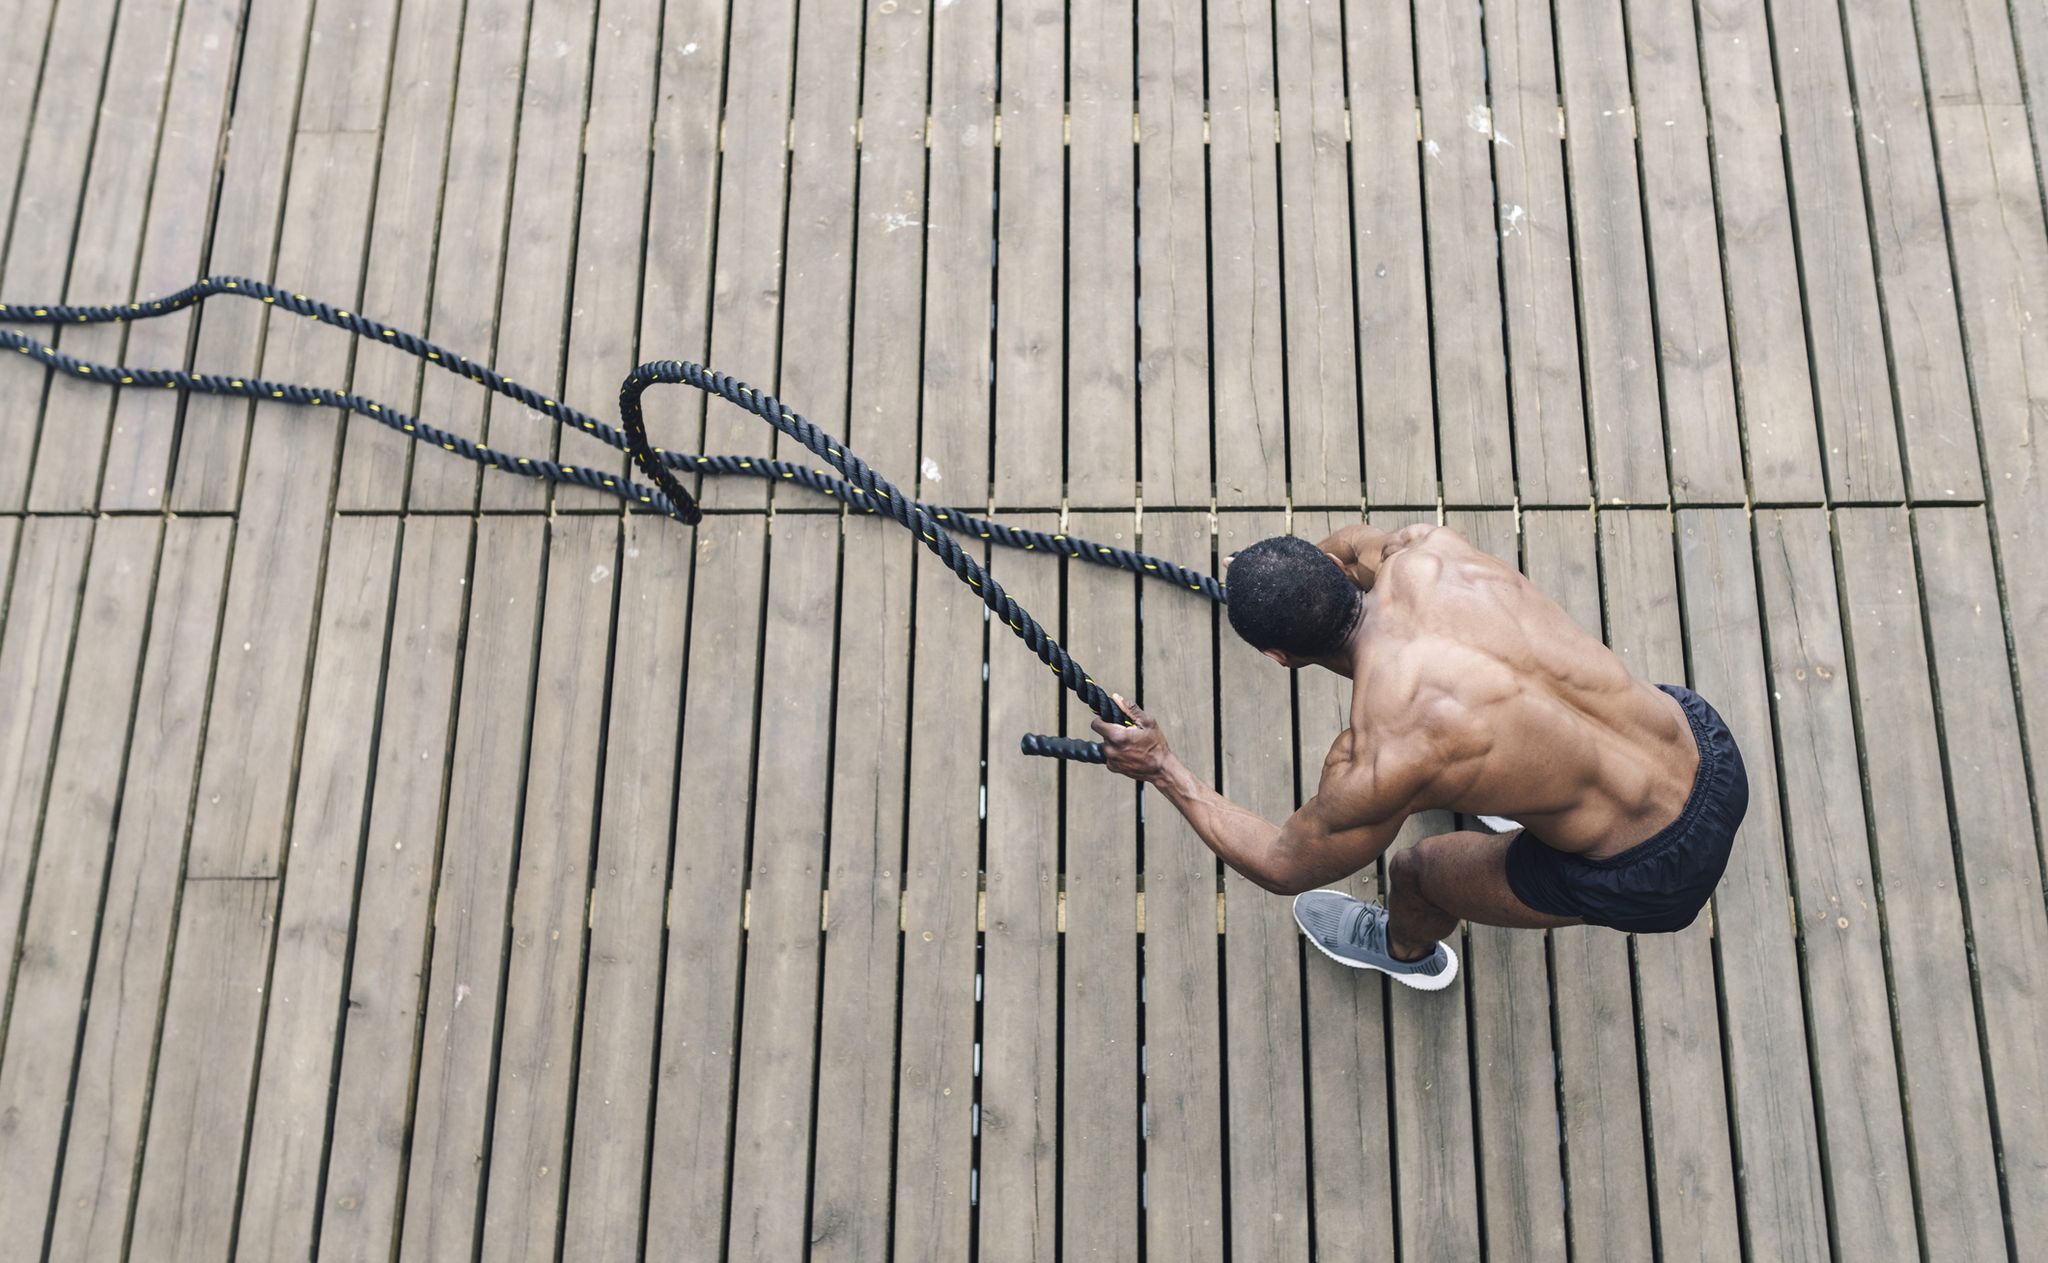 Best Battle Ropes: 11 Best Ropes For Burning Fat and Building